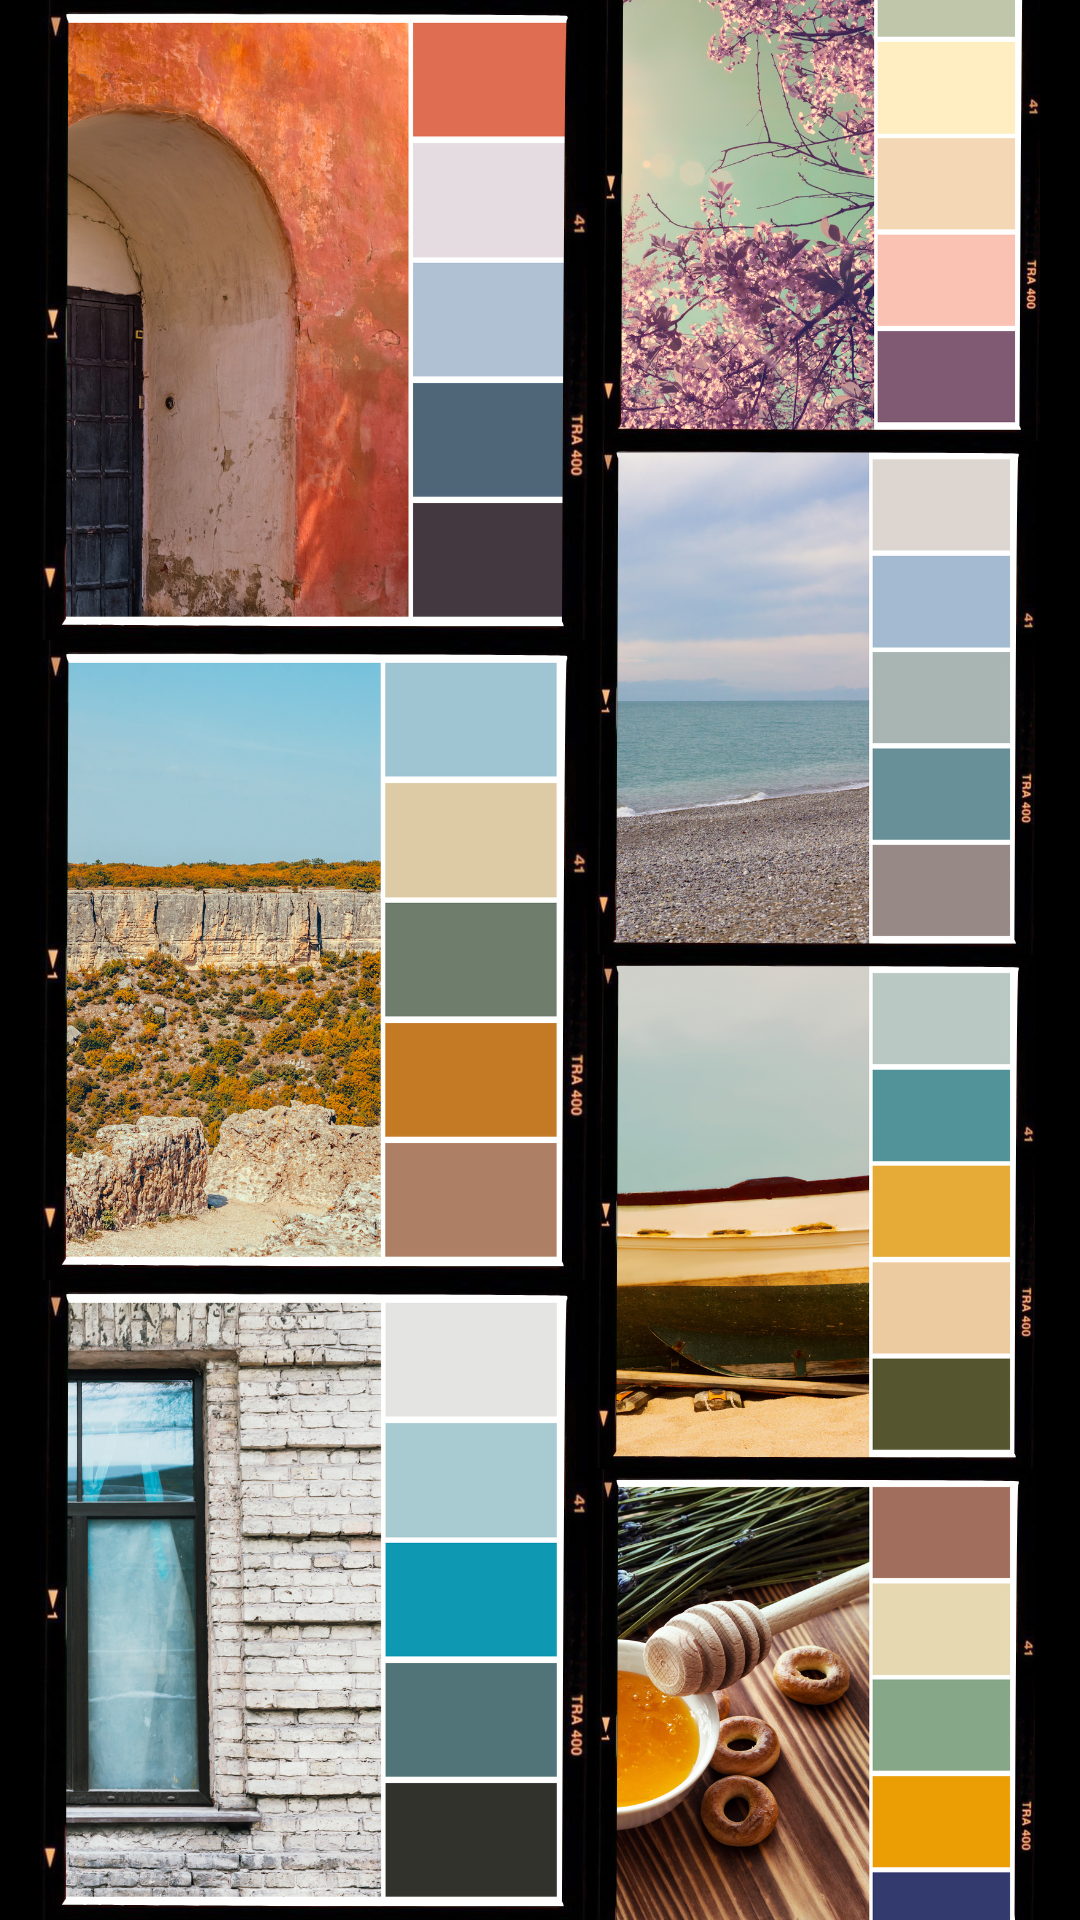 Retro Photography Tip #5: Catch the Trend of the Vintage Colour Palette